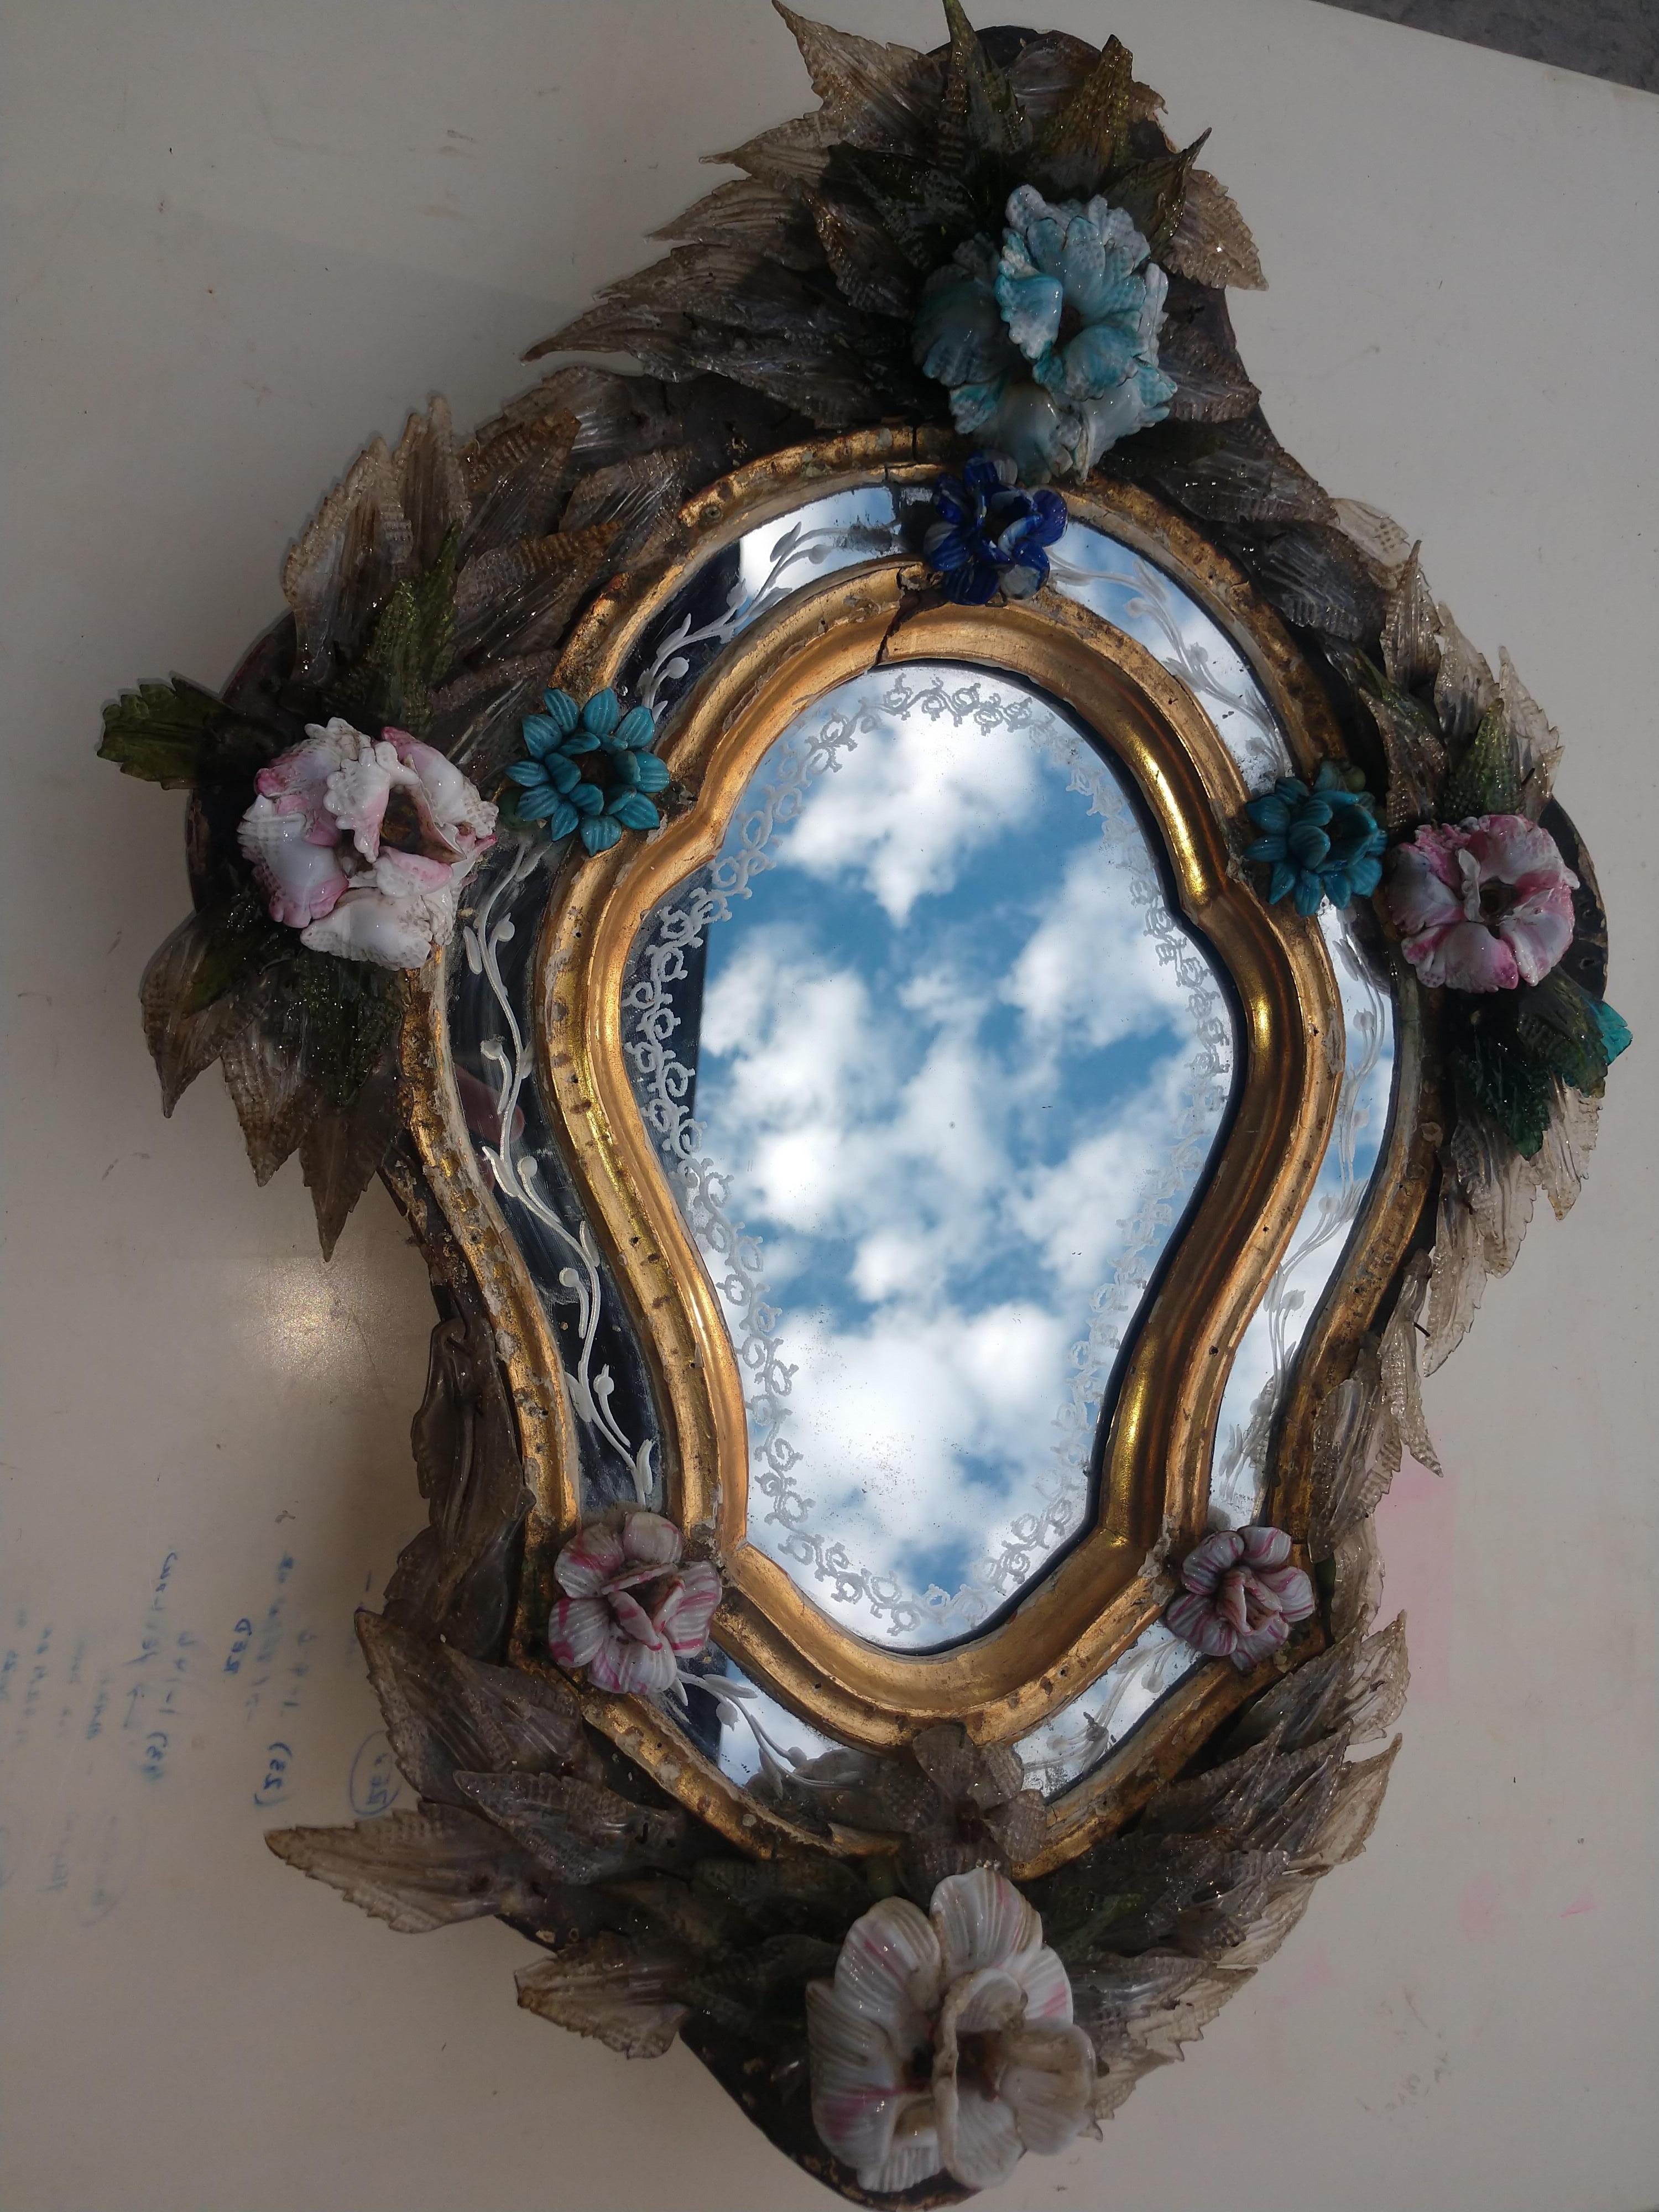 Petite 19thC Venetian Murano Etched Mirror with Flowers and Leaves. 9